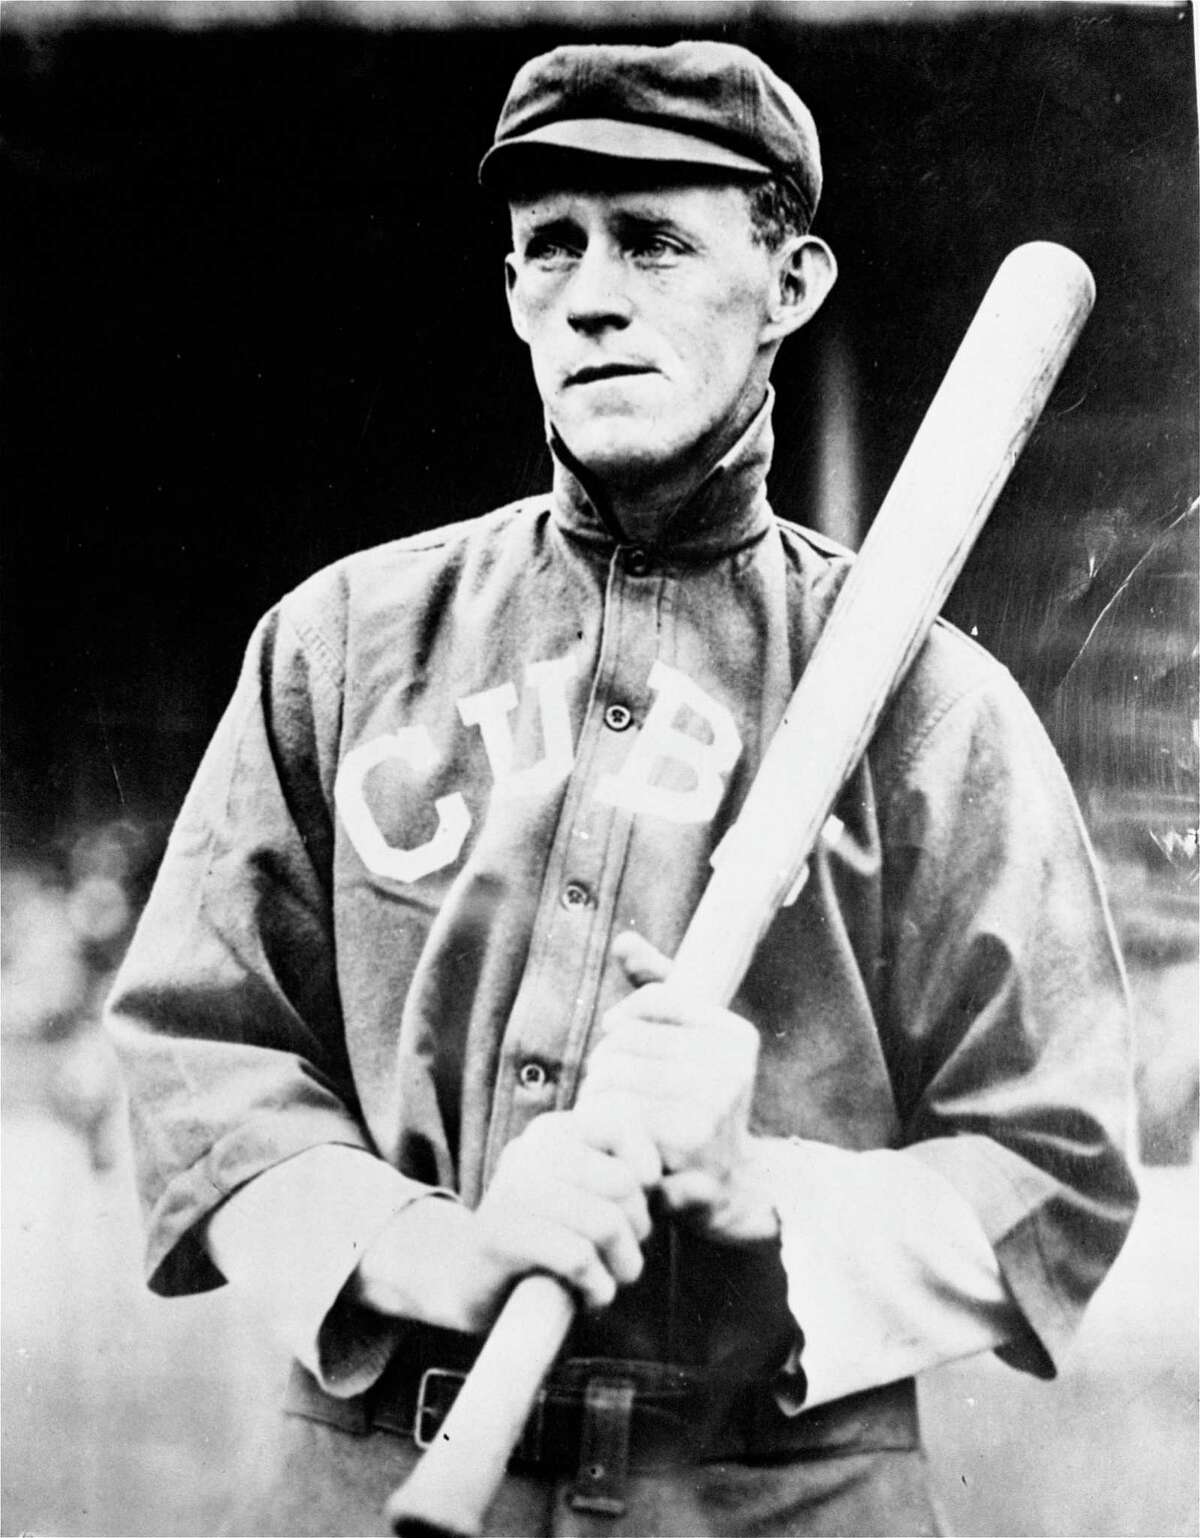 FILE - This is a 1916 file photo showing Chicago Cubs' Johnny Evers. Joe Tinker, Evers, Frank Chance and Mordecai Brown helped lead the Chicago Cubs to their last World Series championship 108 years ago (AP Photo/File) ORG XMIT: NY154